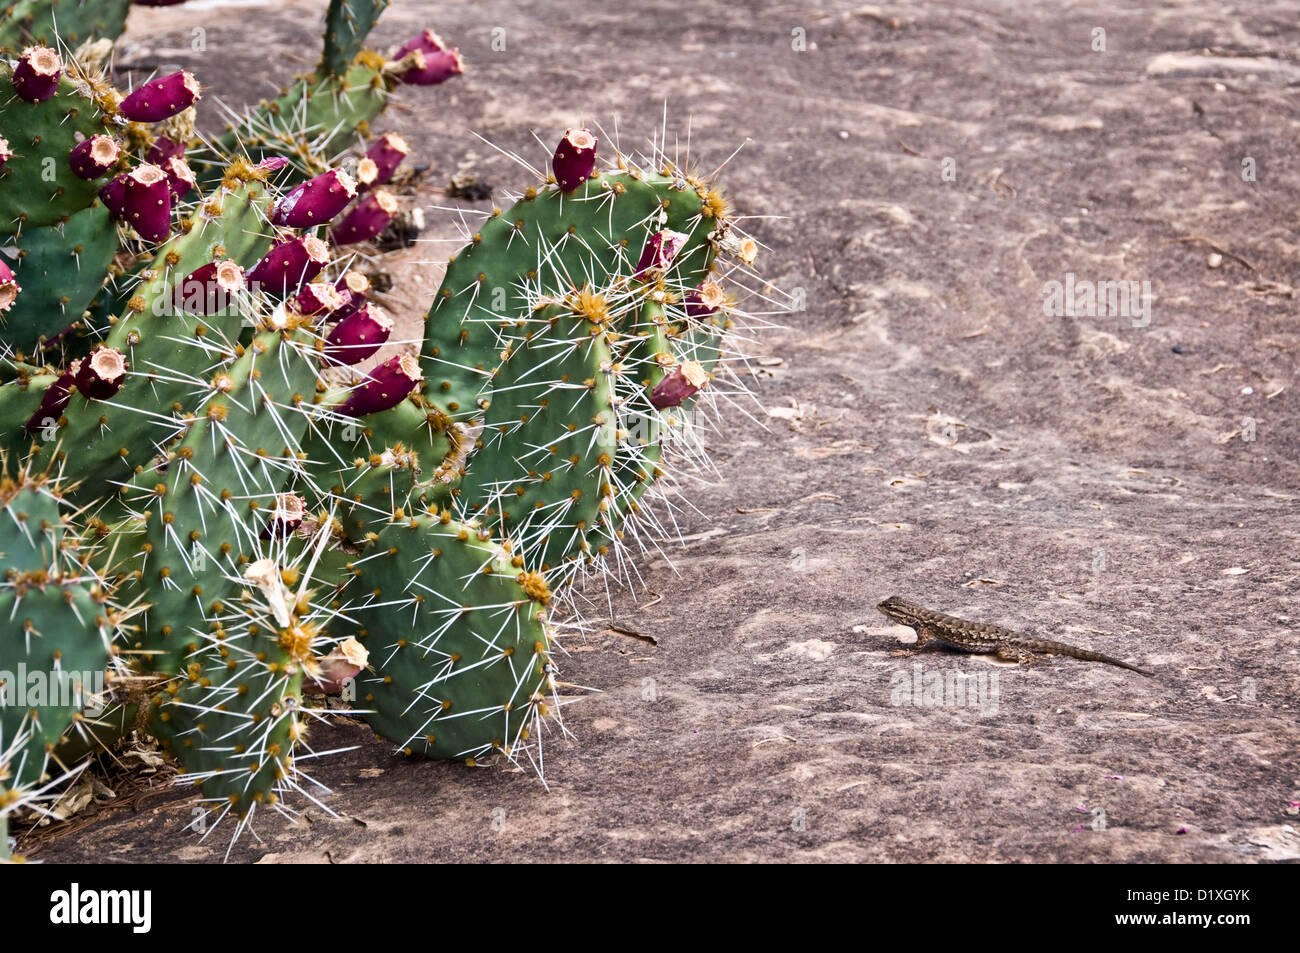 A prickly pear cactus tree and a small lizzard - Utah, USA Stock Photo